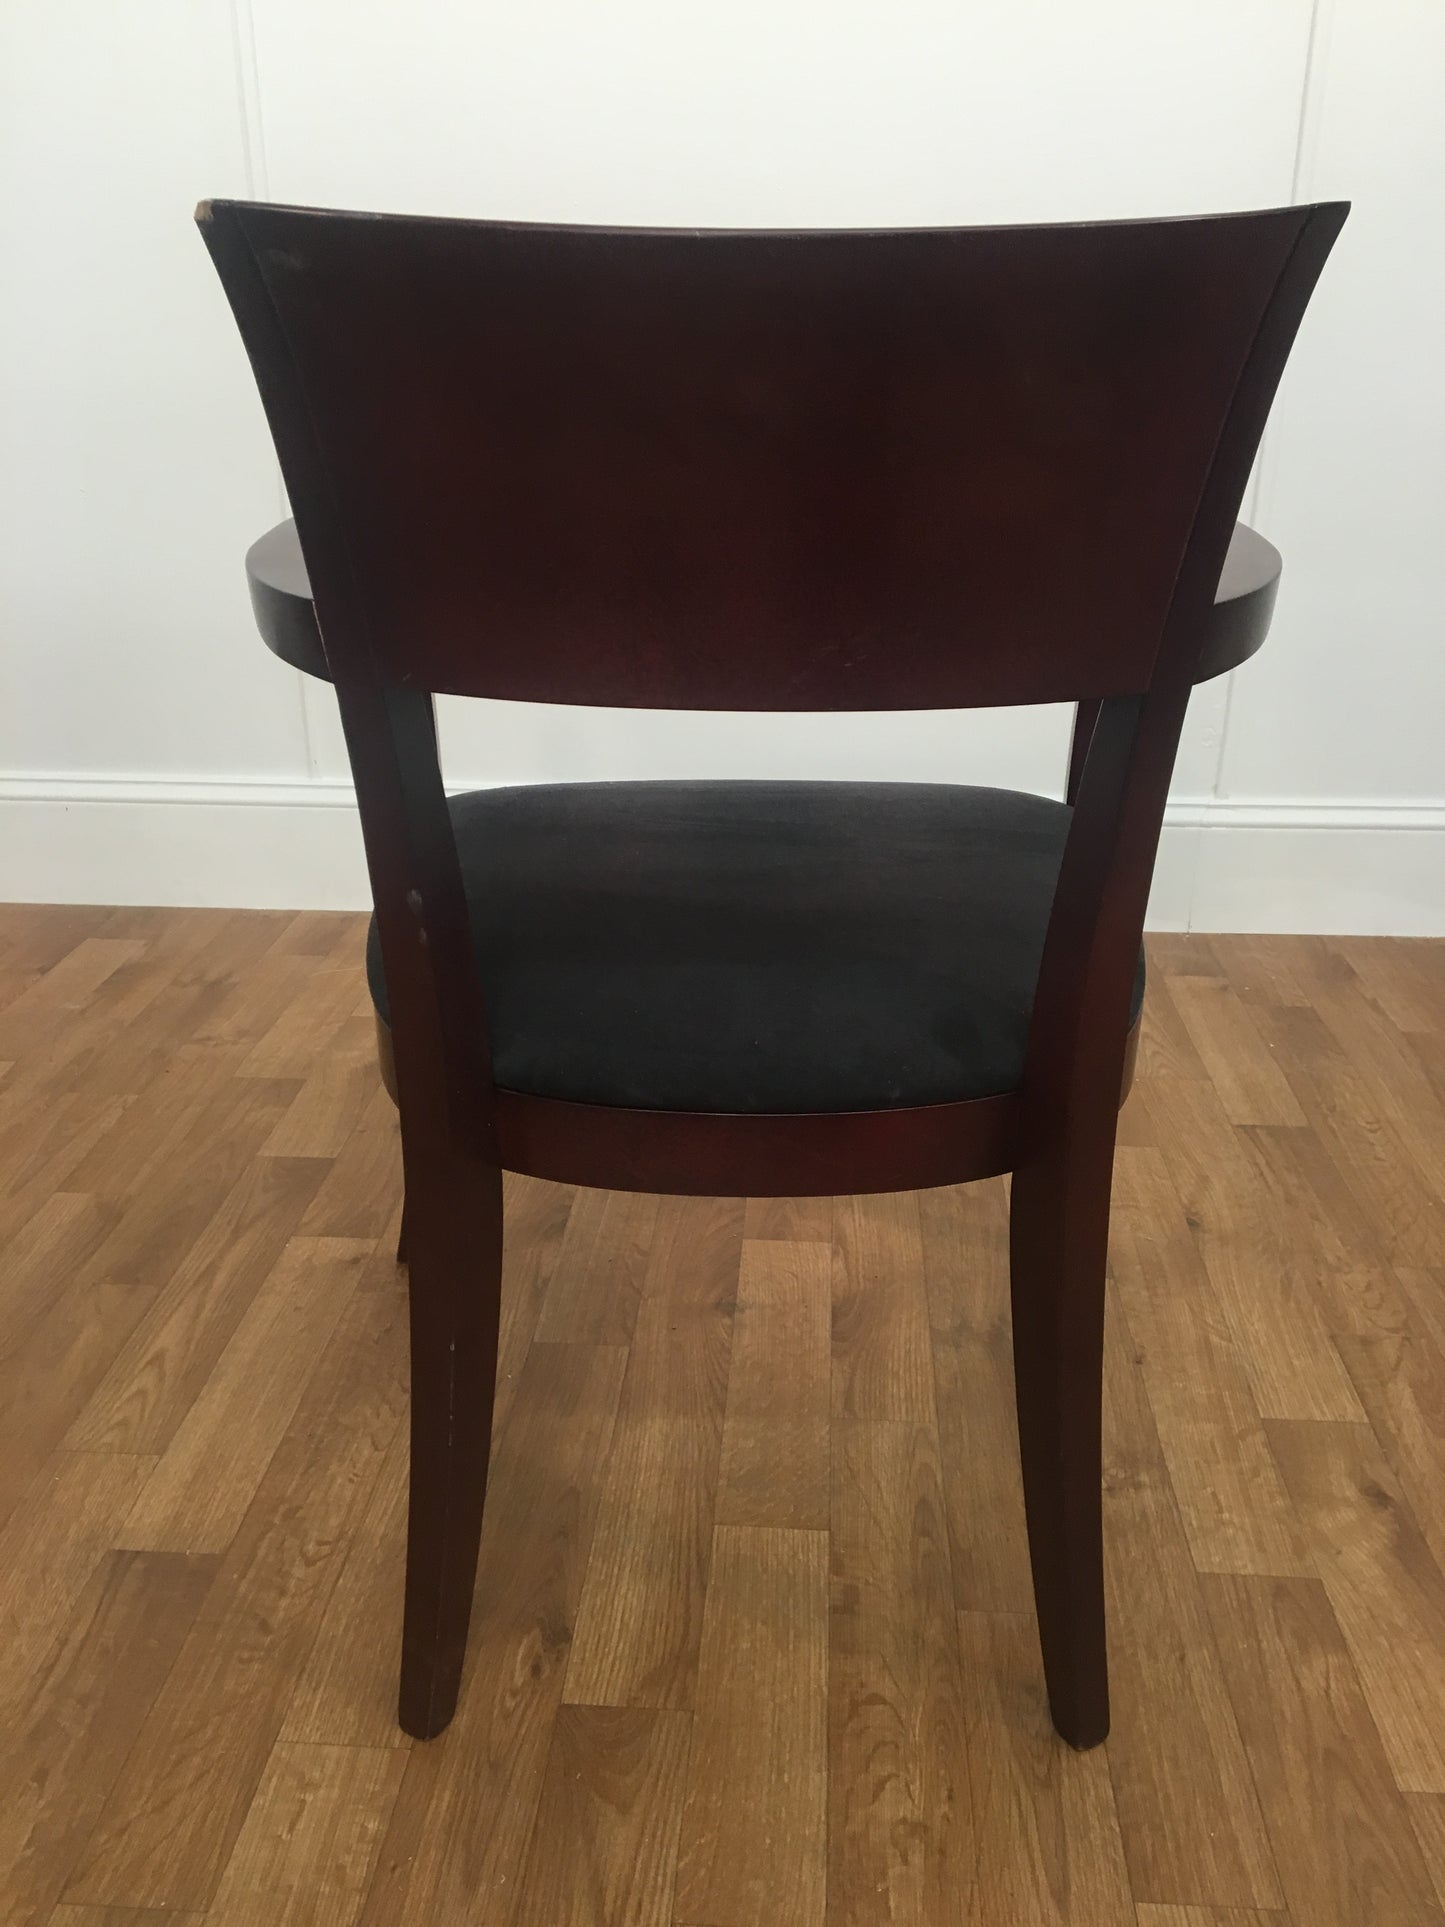 OPEN BACK MAHOGANY ARM CHAIR WITH BLACK CUSHION